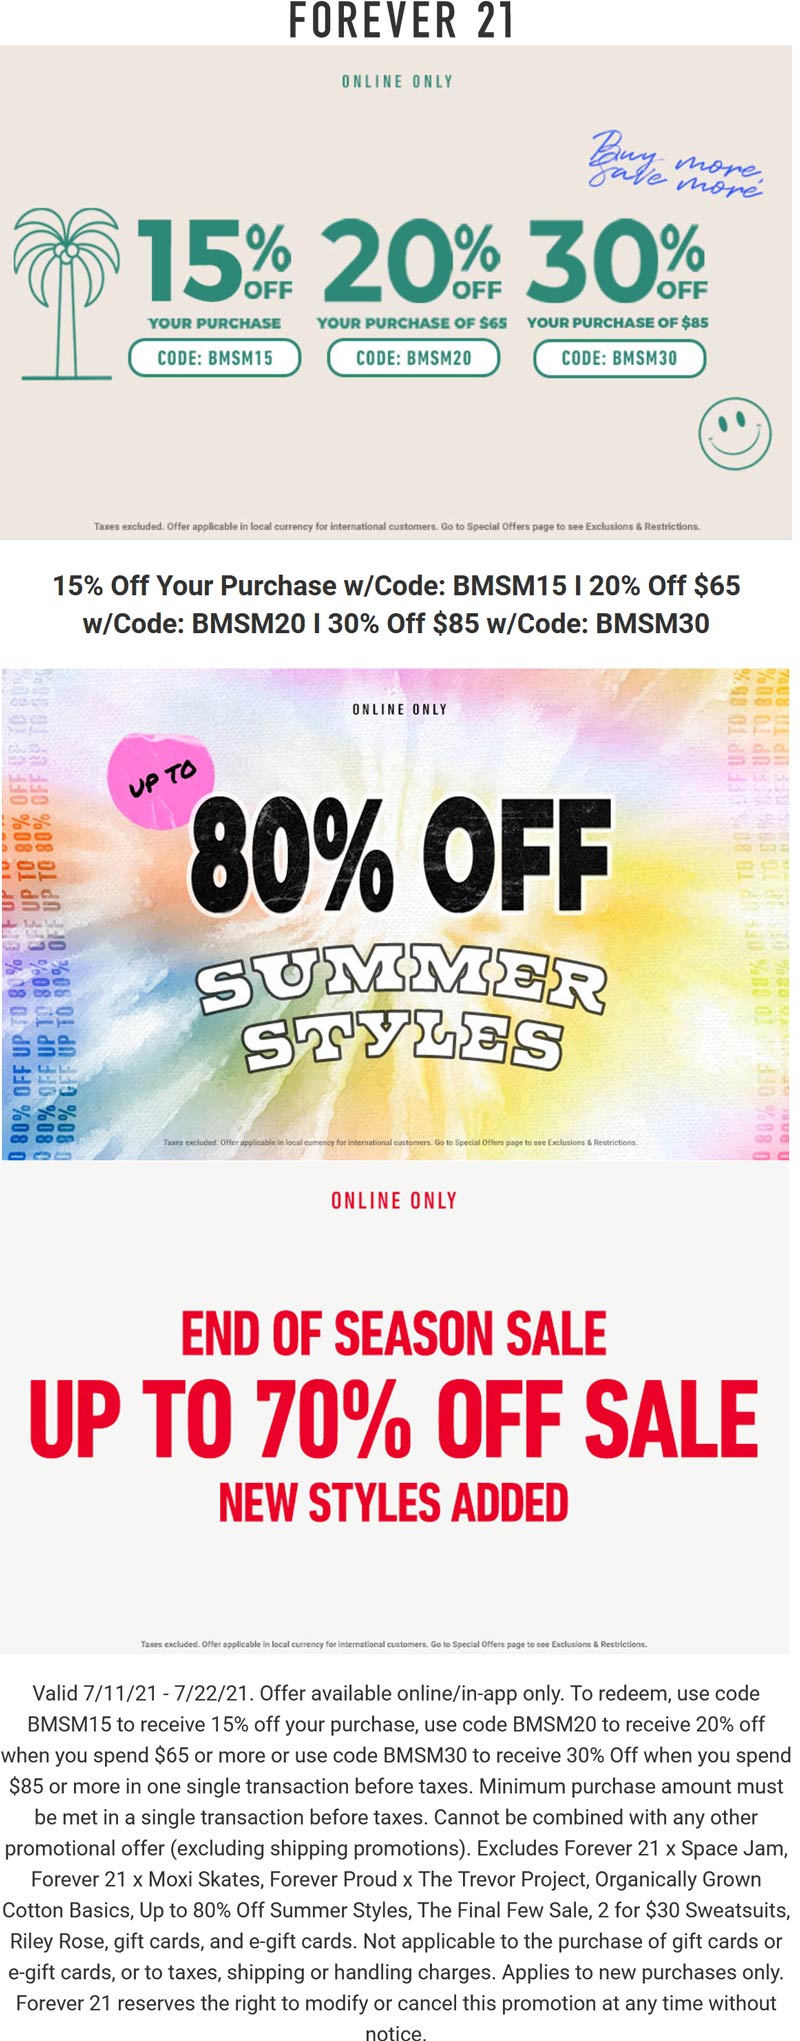 Forever 21 stores Coupon  15-30% off online at Forever 21 via promo code BMSM15 #forever21 